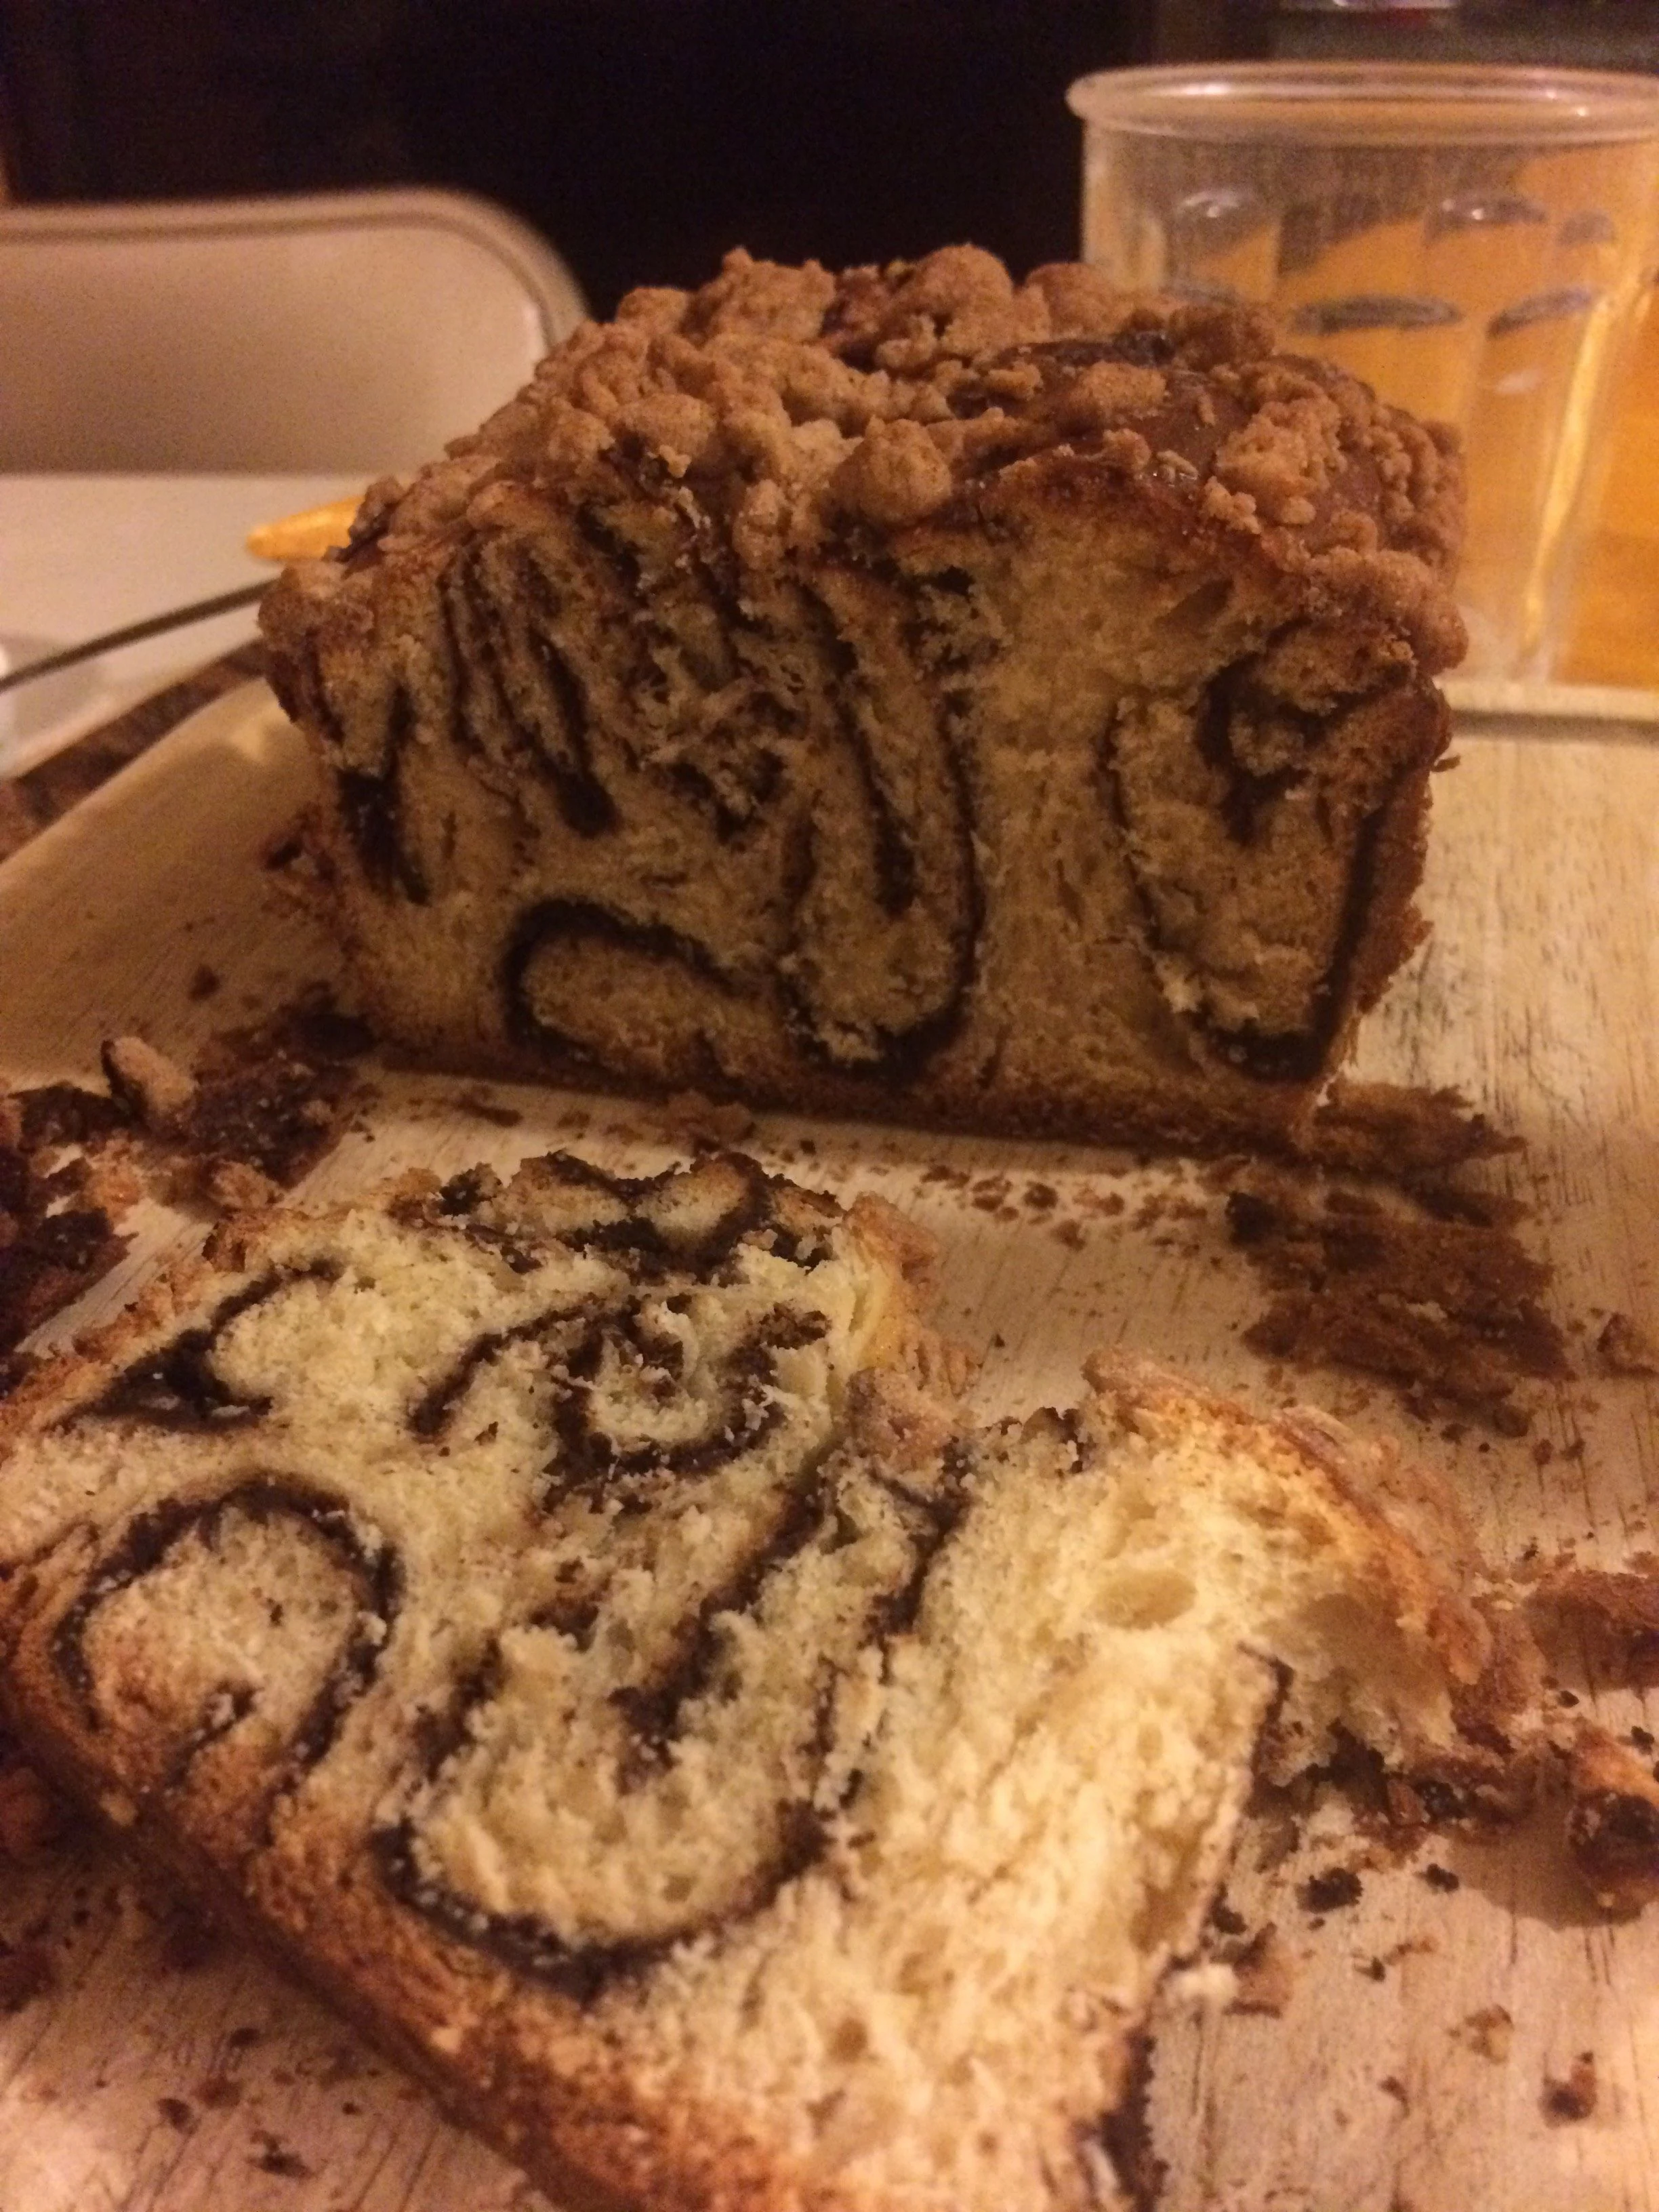 My daughter will carry on the Polish tradition of Babka